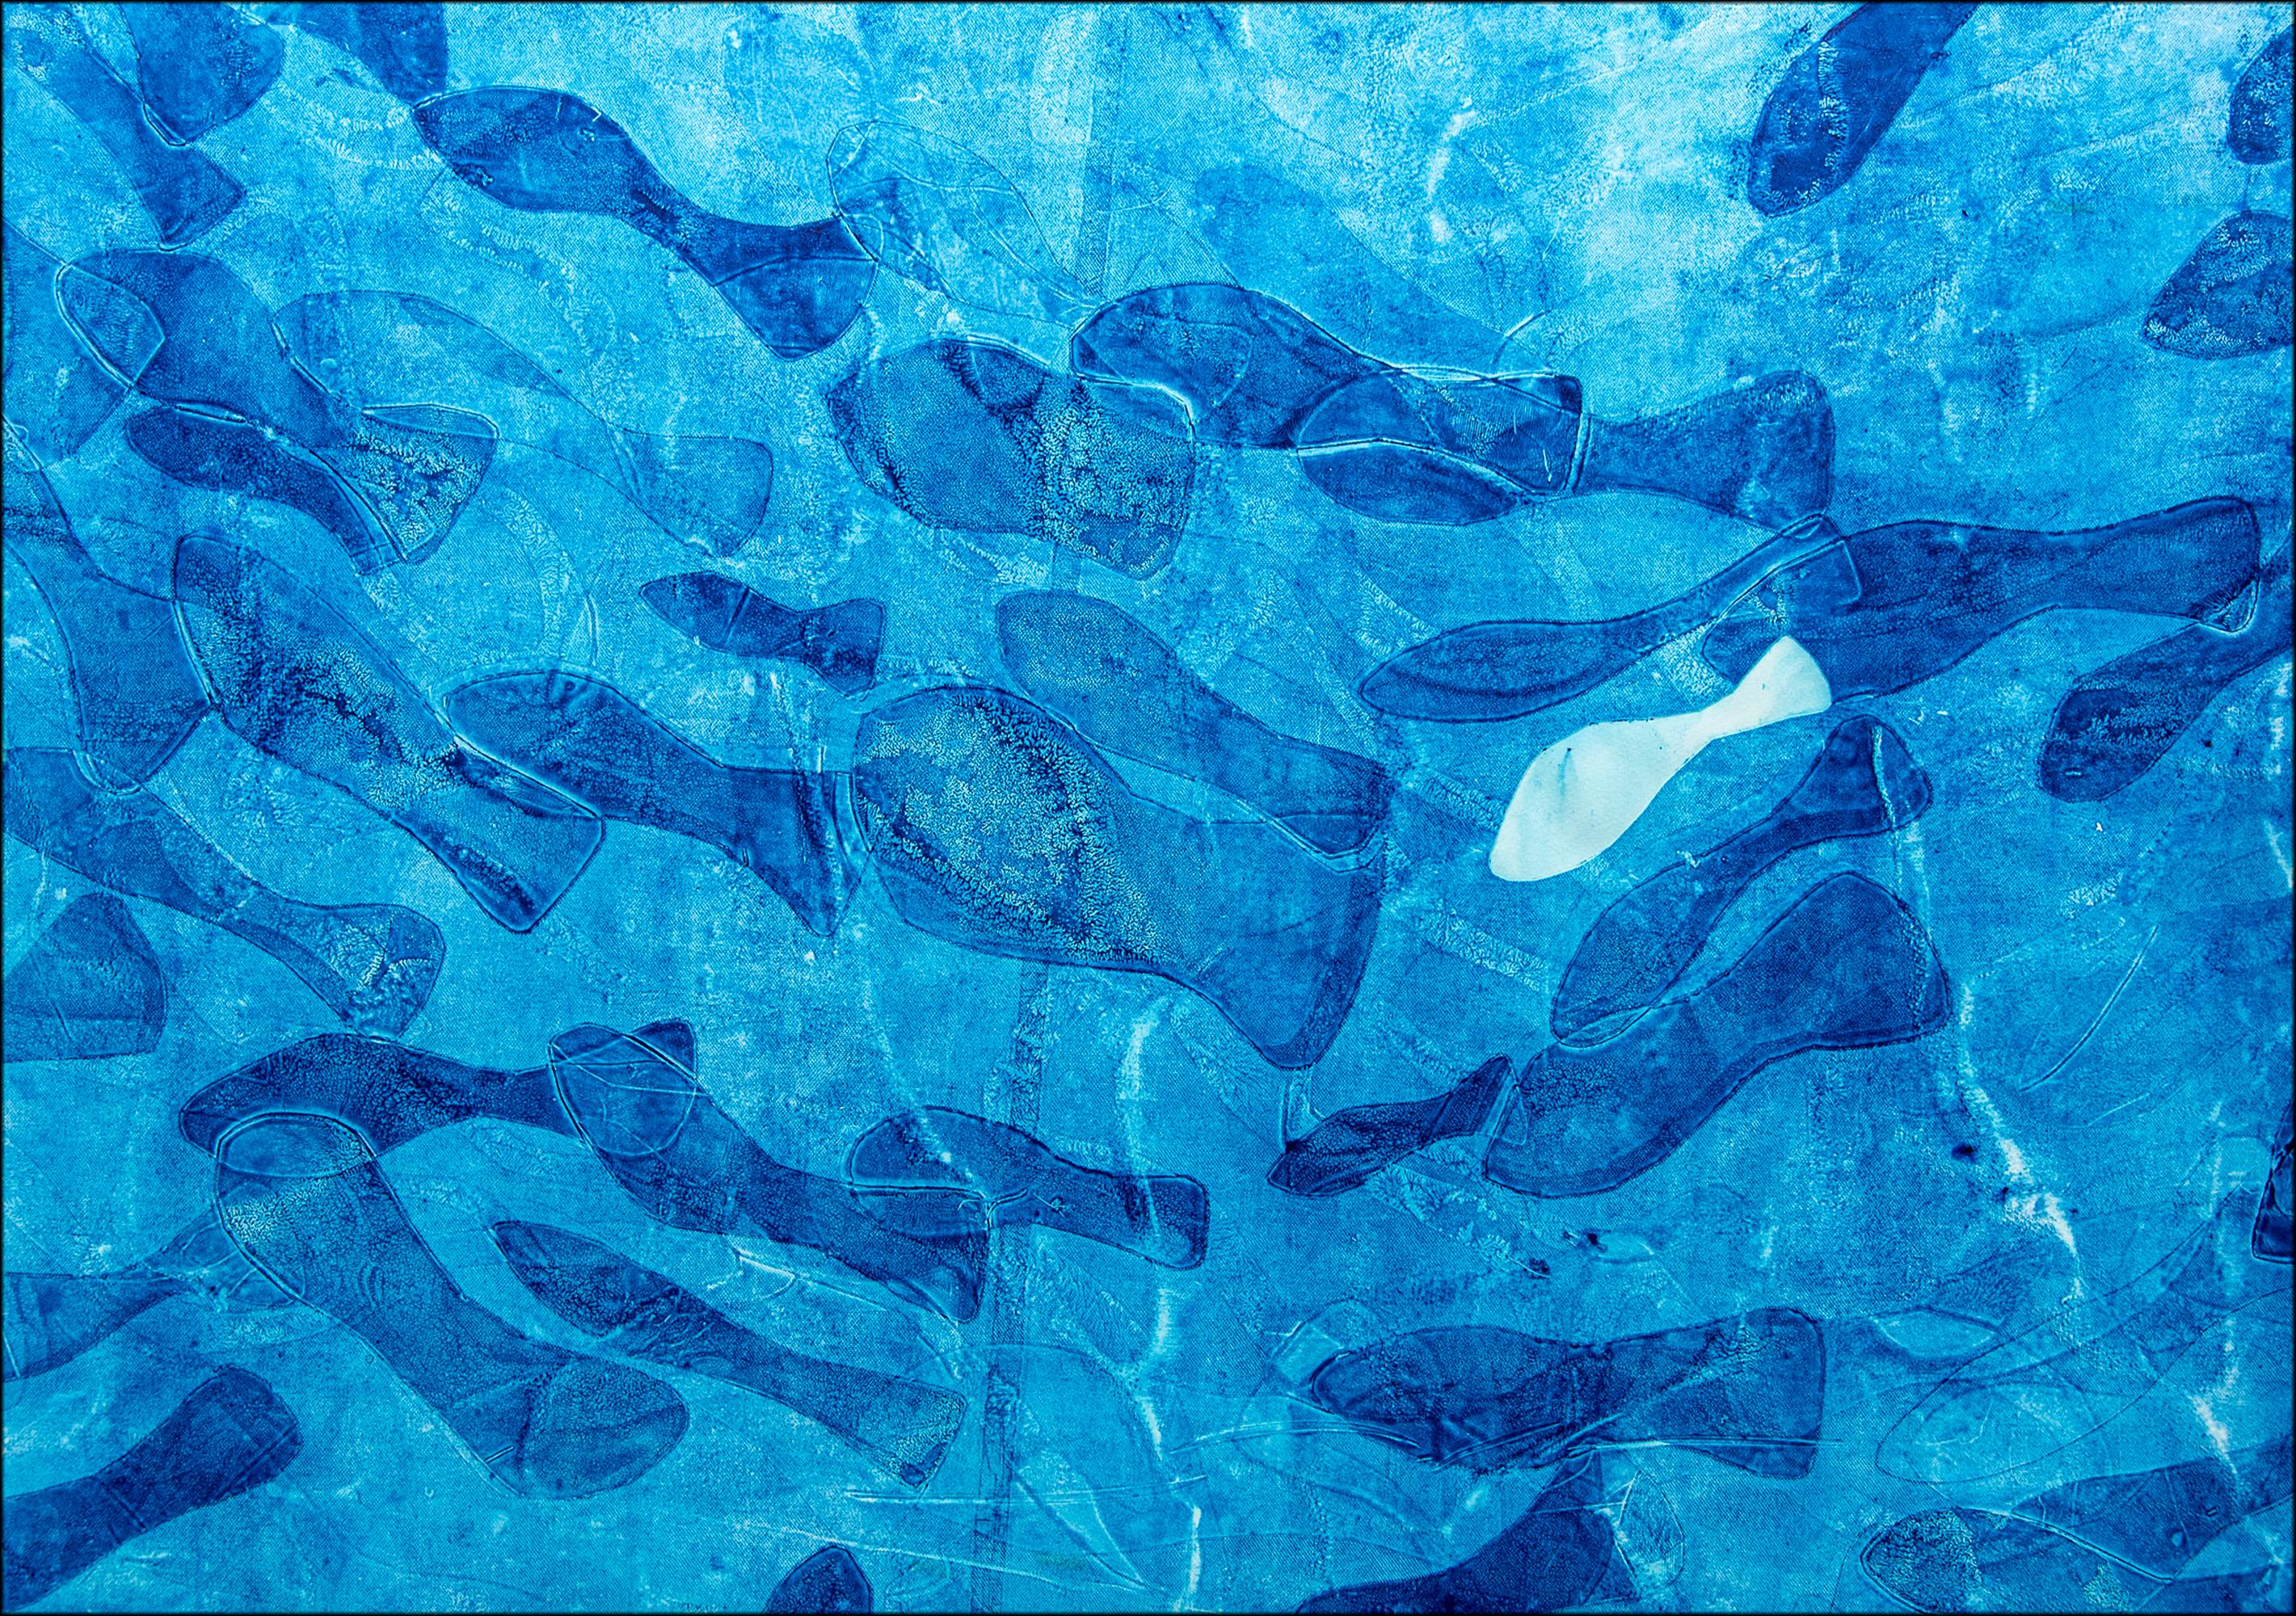 Enric Servera Abstract Painting - Blue Tones, Abstract Figurative Painting of  Fish Patterns, Seascape on Paper 